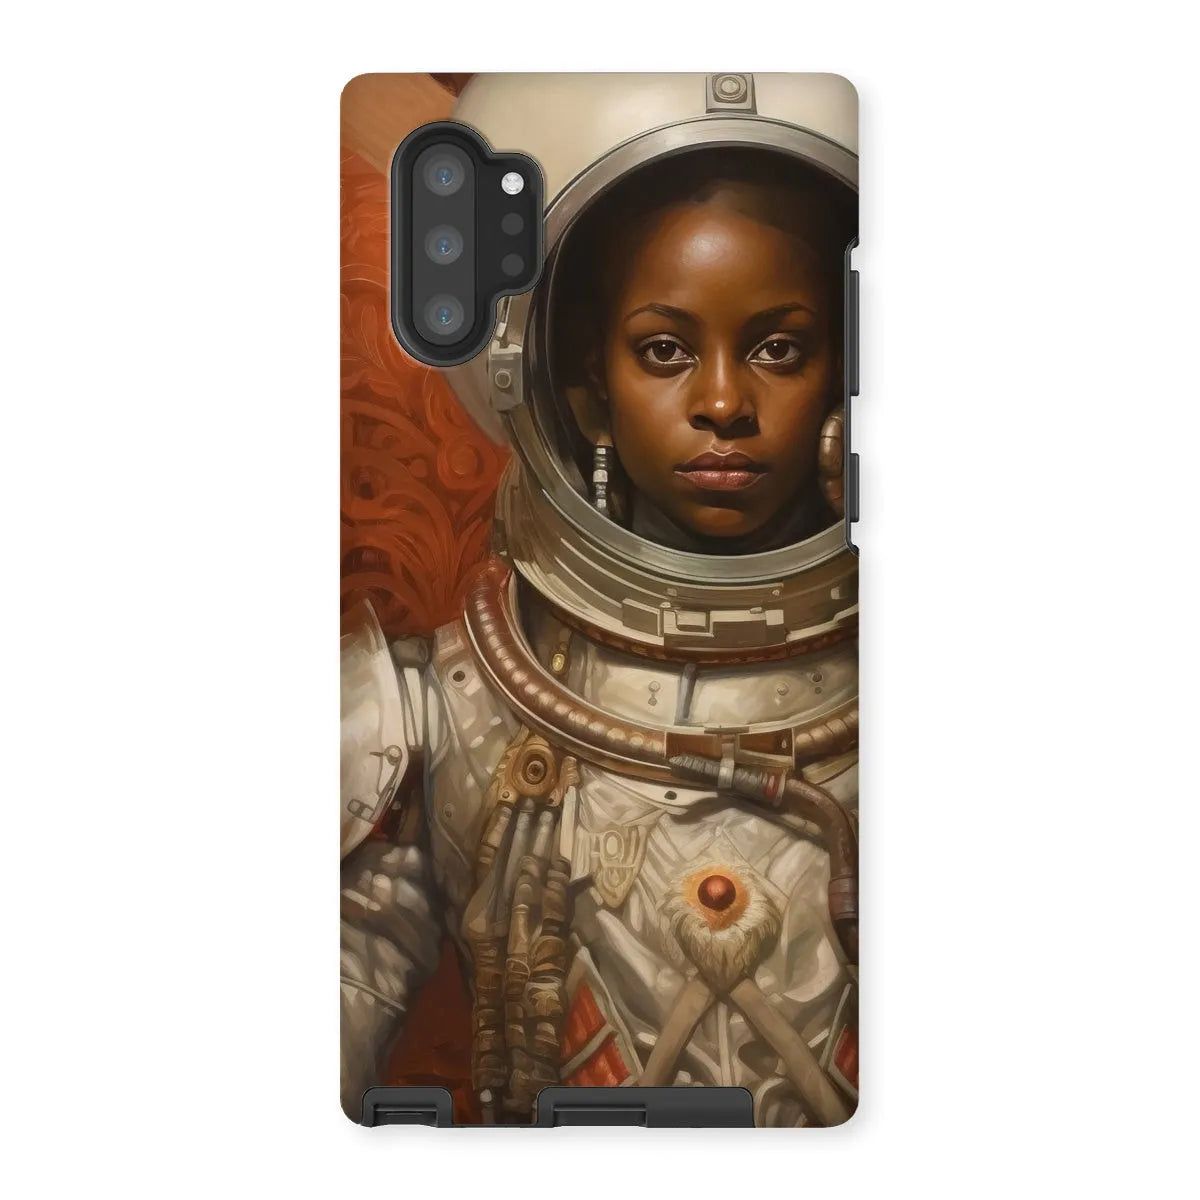 Ava - Black Lesbian Astronaut Aesthetic Phone Case - Samsung Galaxy Note 10p / Matte - Mobile Phone Cases - Aesthetic